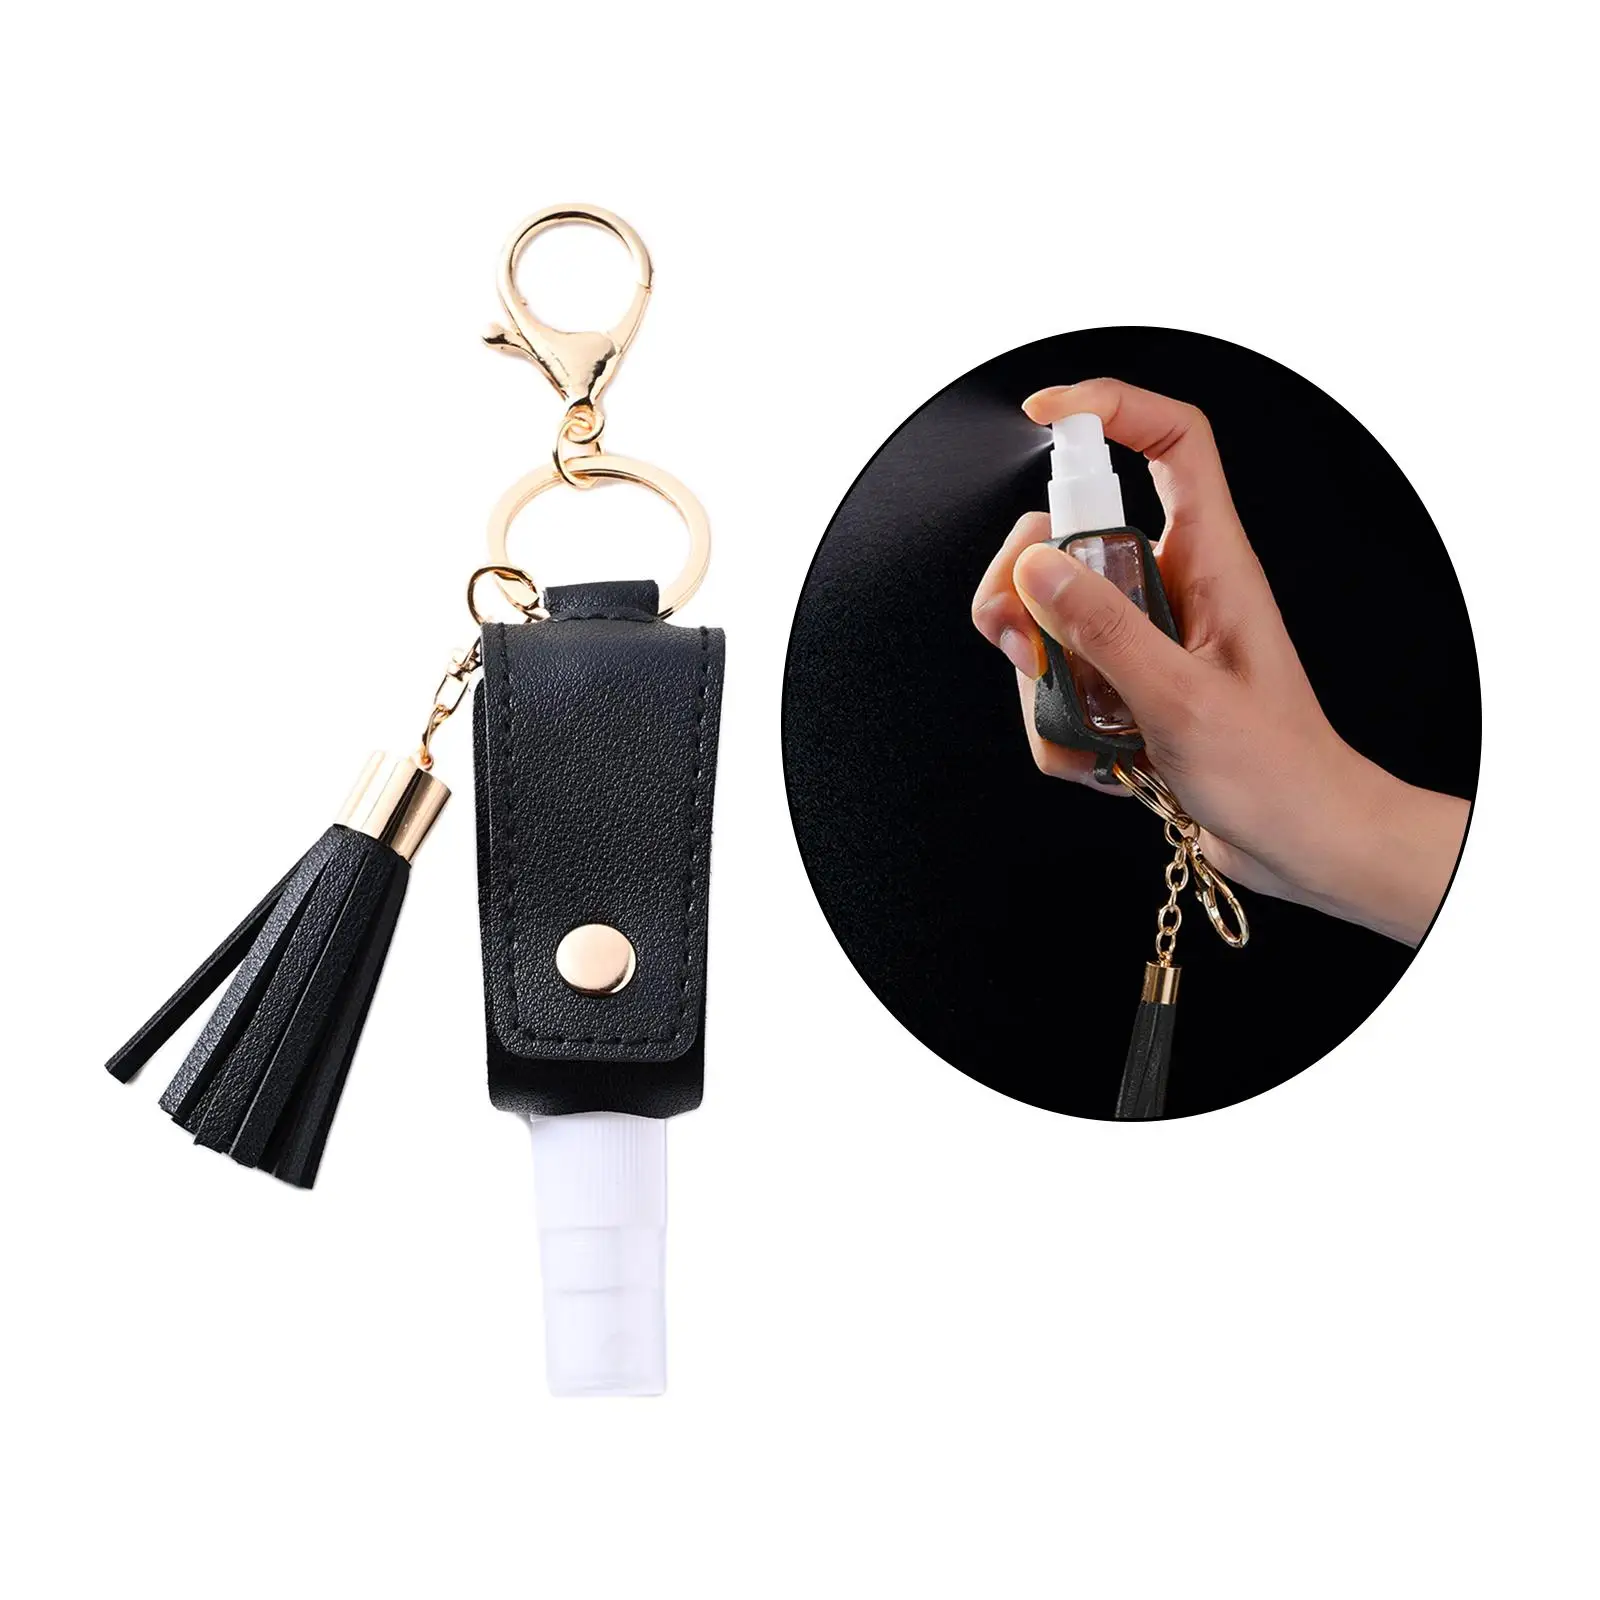 30ml Hand Washing Holder Keychain Refillable Spray Bottle Travel Size Containers Empty Bottle for Conditioner Liquid Shampoo